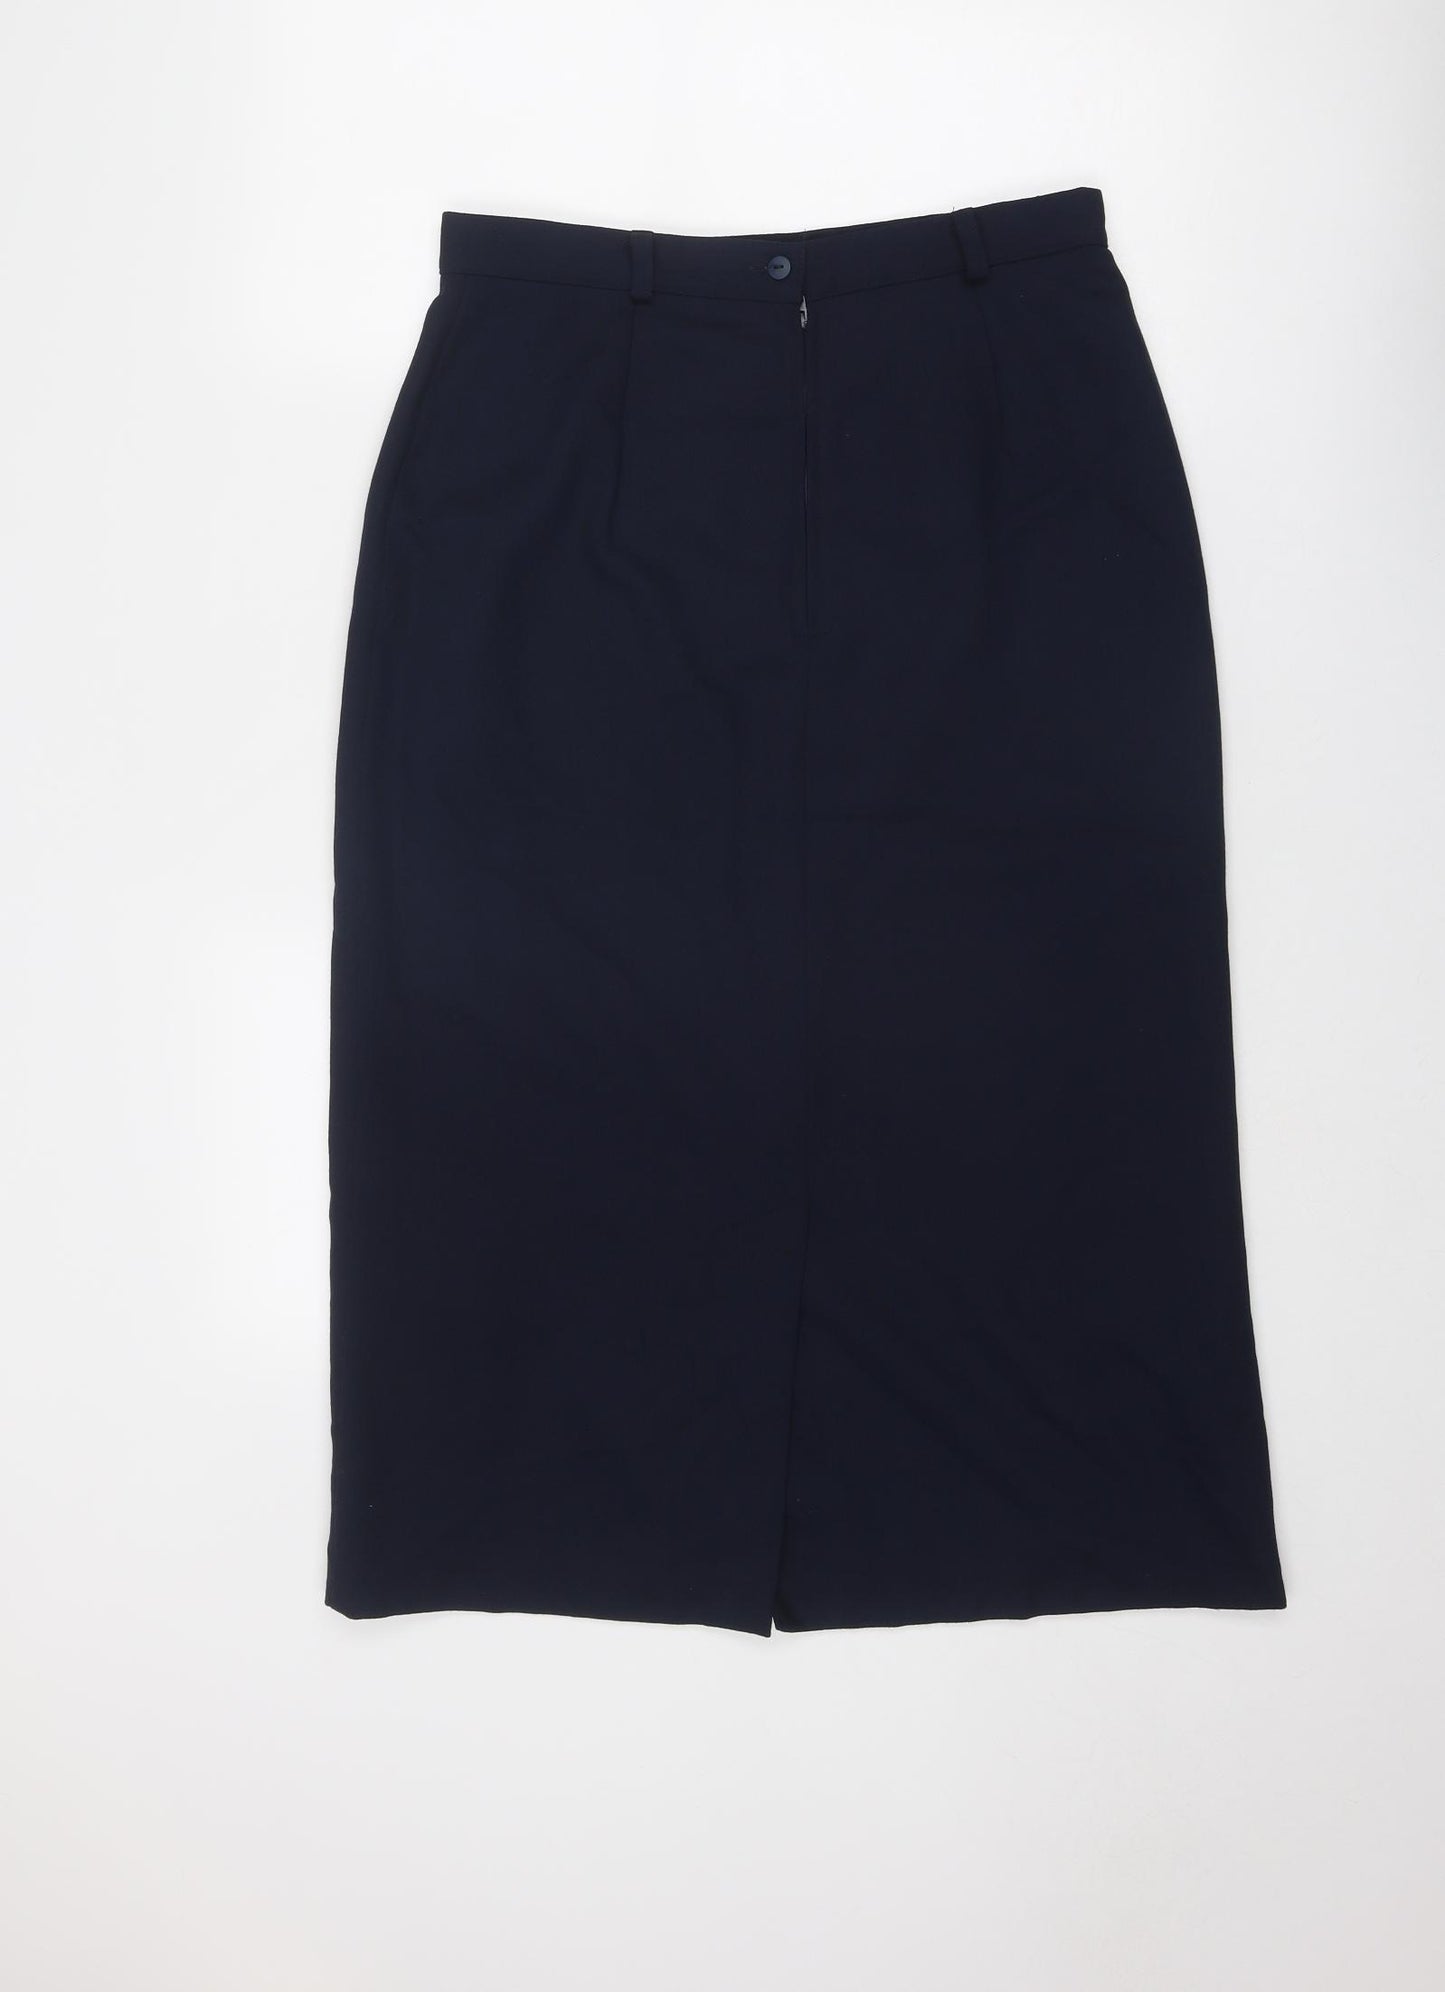 Your Sixth Sense Womens Blue Polyester A-Line Skirt Size 16 Zip